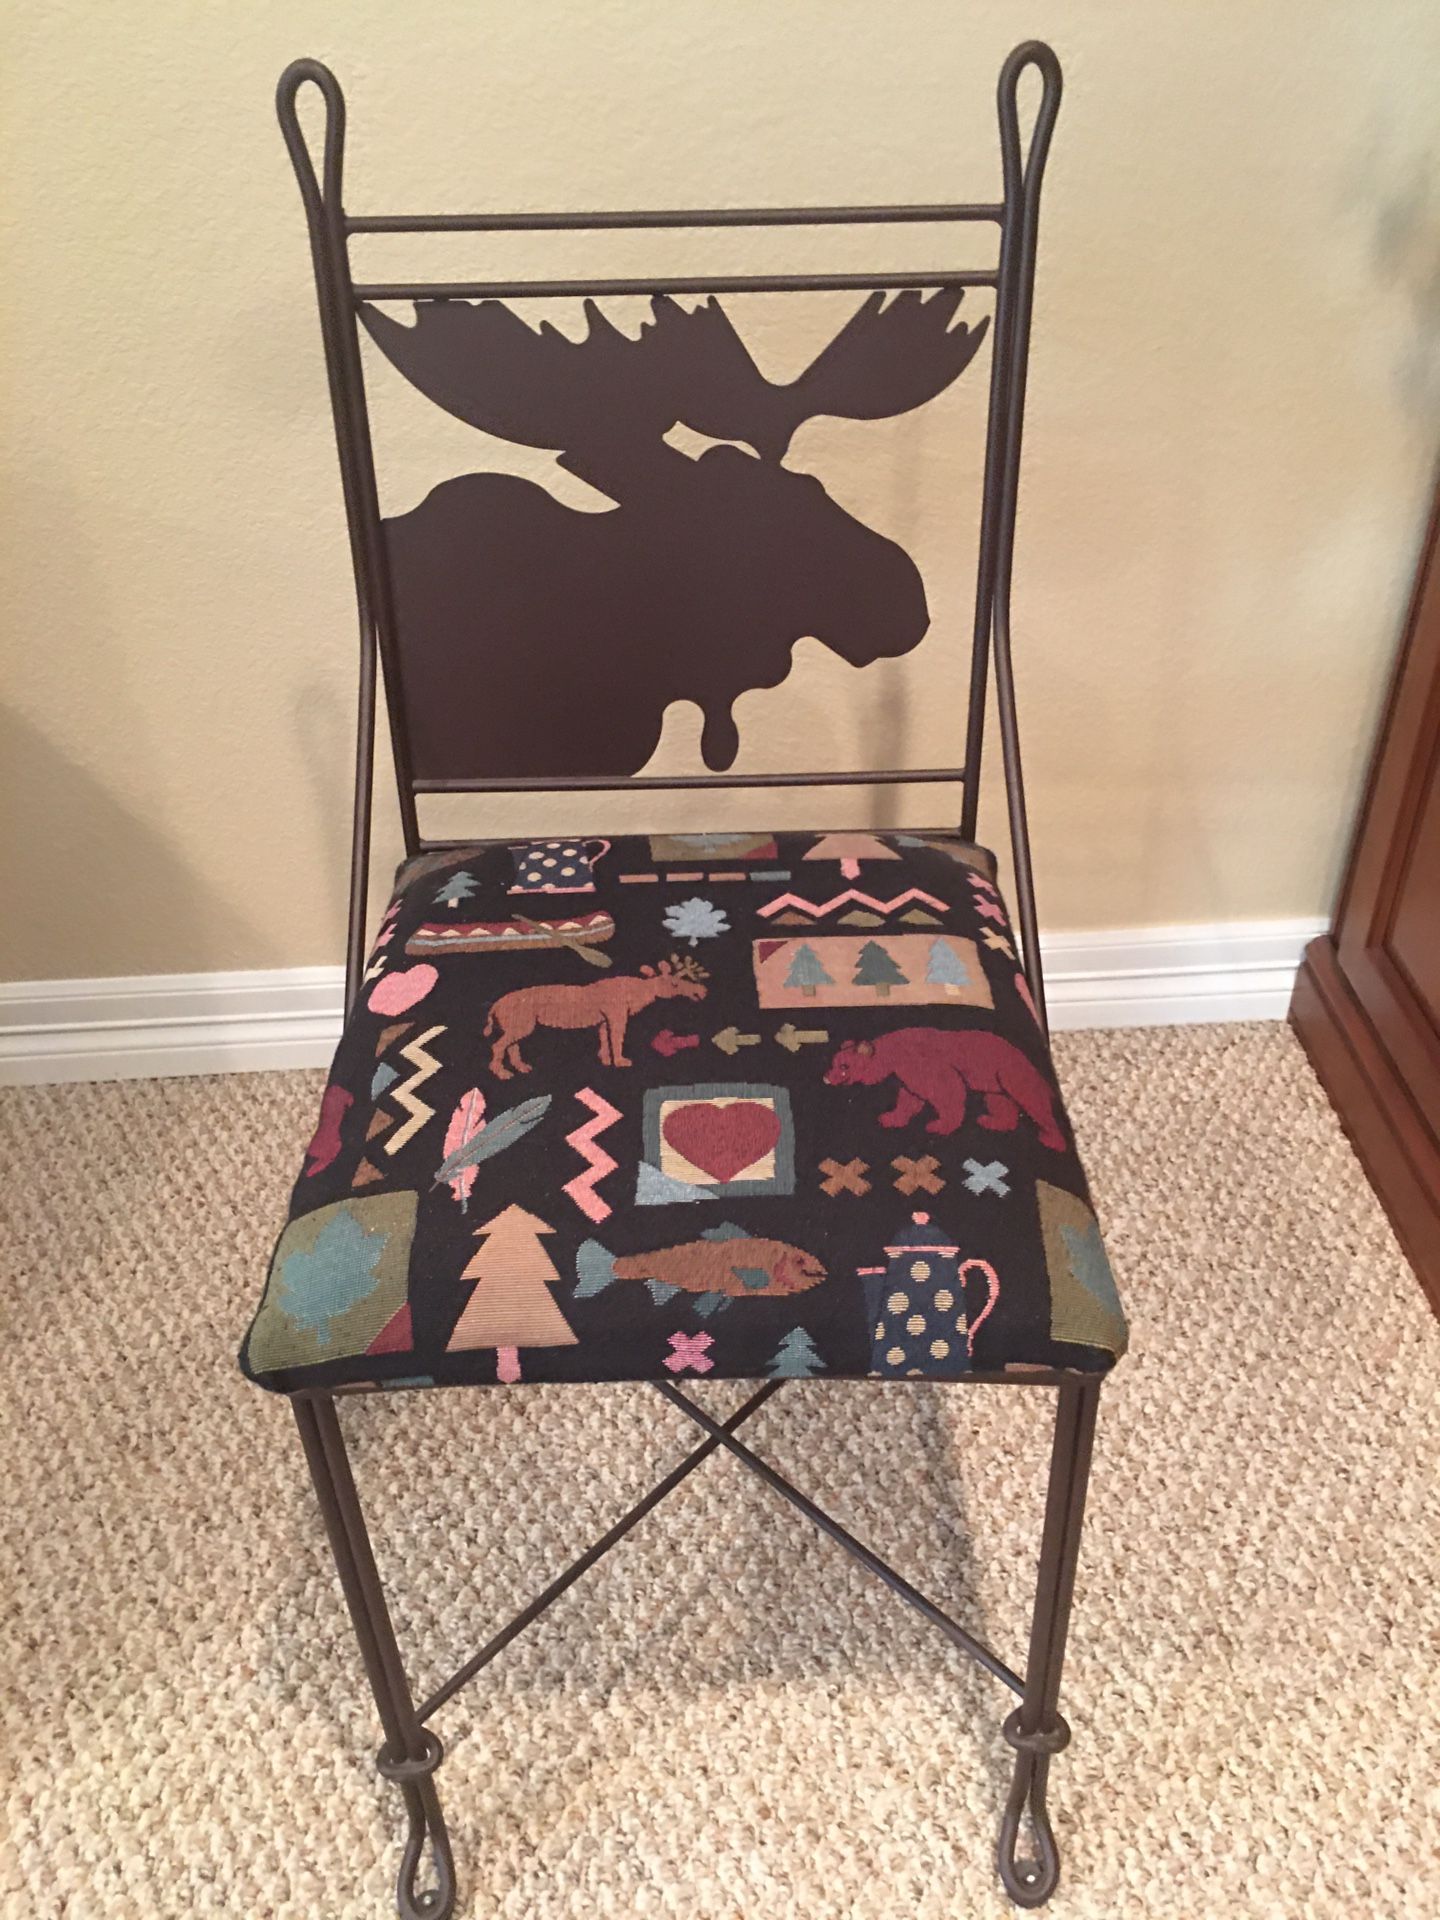 Northwoods Metal and Fabric Chair with Matching Toss Pillows and Fabric Table Cloths